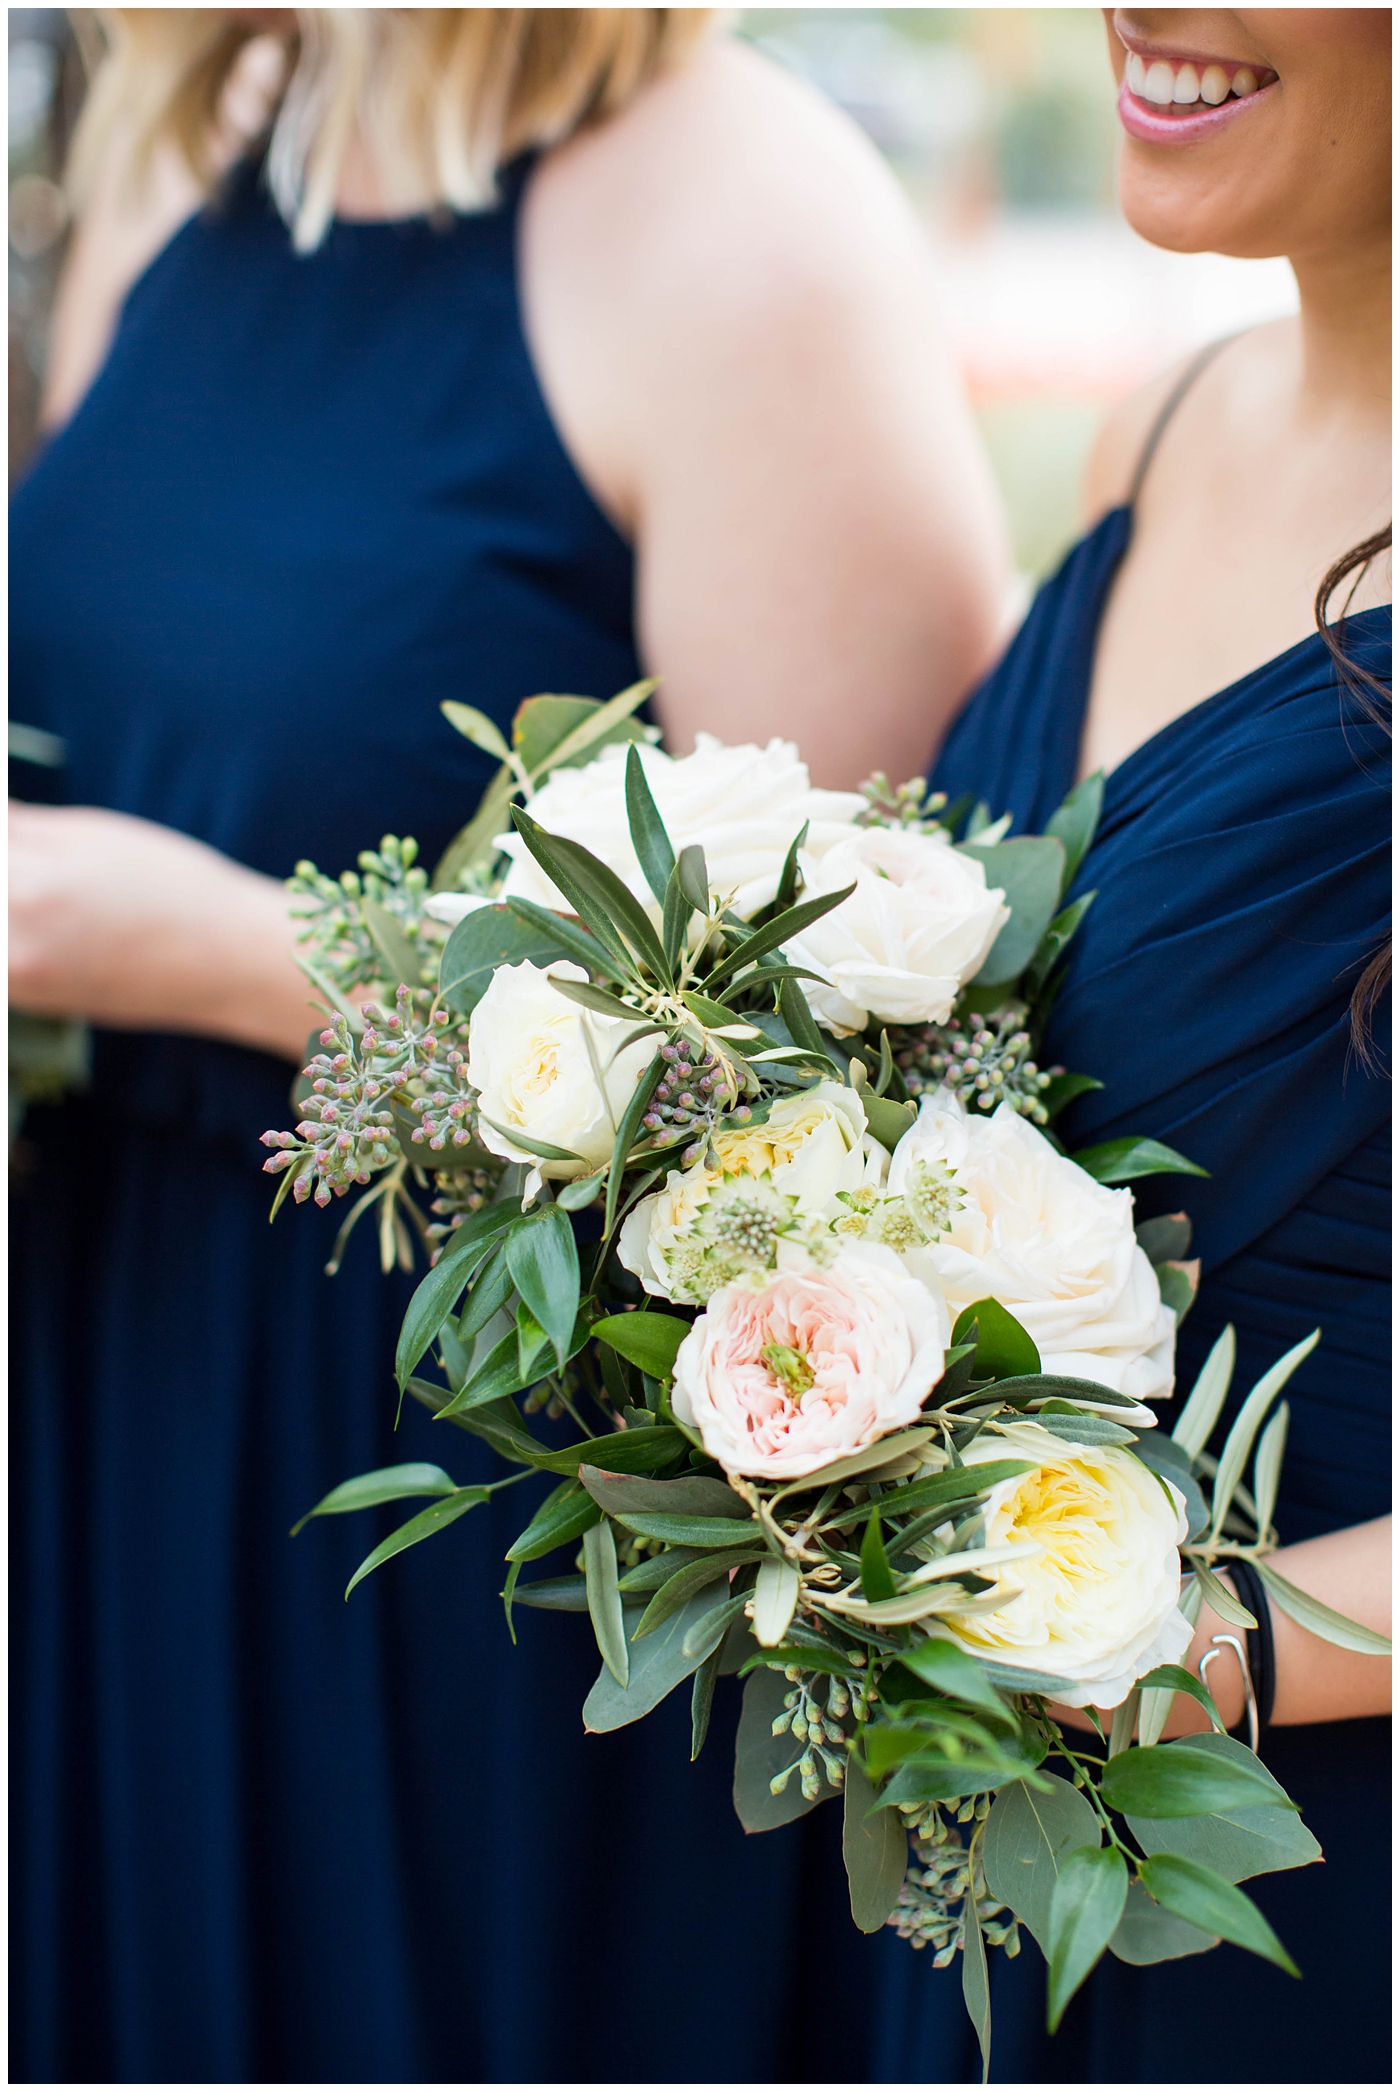 bridesmaids in assorted navy blue dresses with white rose and greenery flower bouquets on wedding day